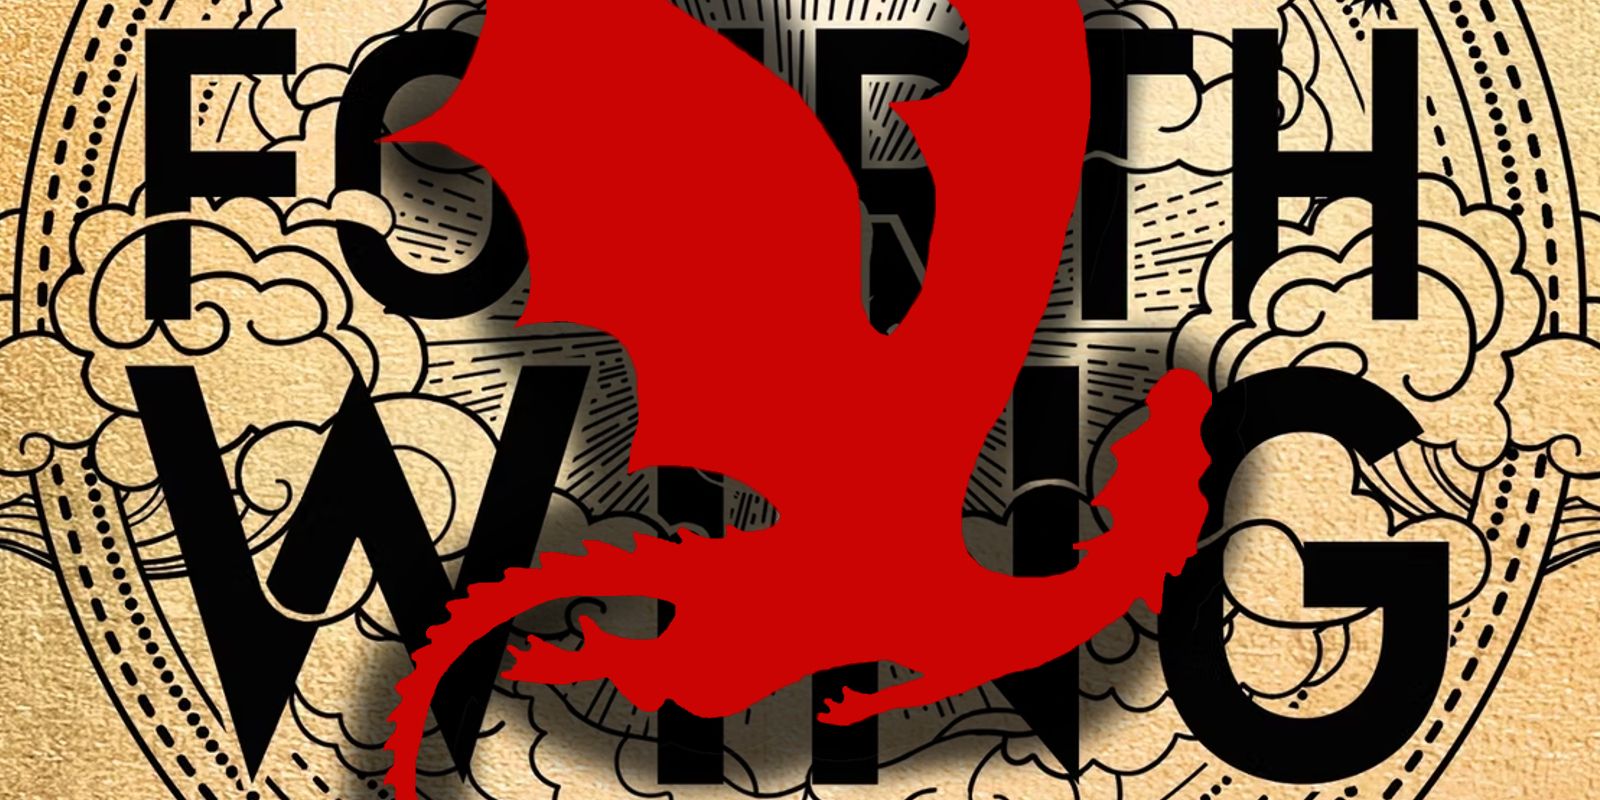 This custom image shows a dragon icon in front of the Fourth Wing book cover